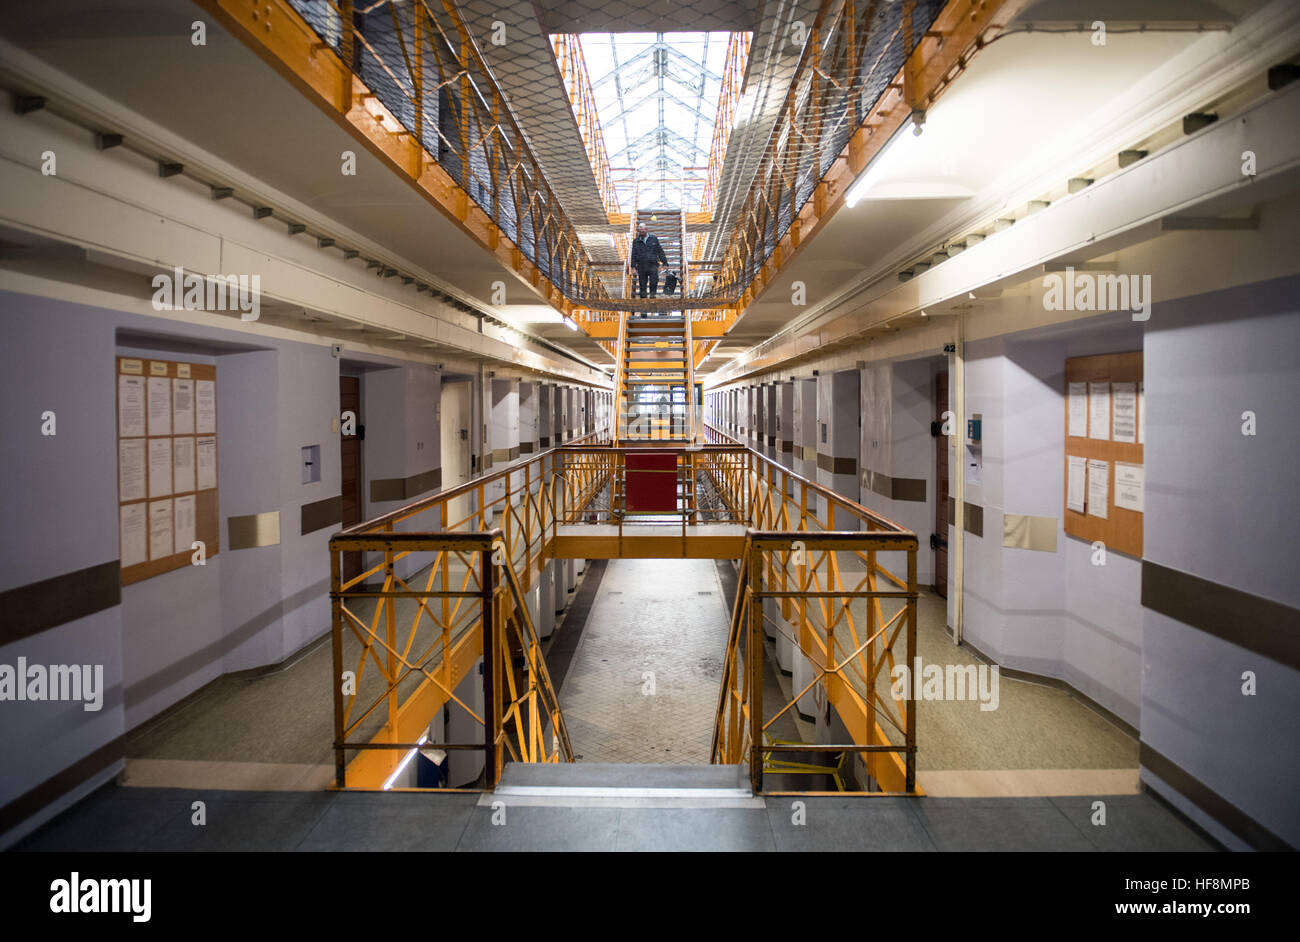 Remscheid, Germany. 8th Dec, 2016. View of the correctional facility (JVA) in Remscheid, Germany, 8 December 2016. More and more Islamic terrorists of different backgrounds are imprisoned in German correctional facilities. Two scholars of Islam are said to prevent their radicalisation. Photo: Bernd Thissen/dpa/Alamy Live News Stock Photo